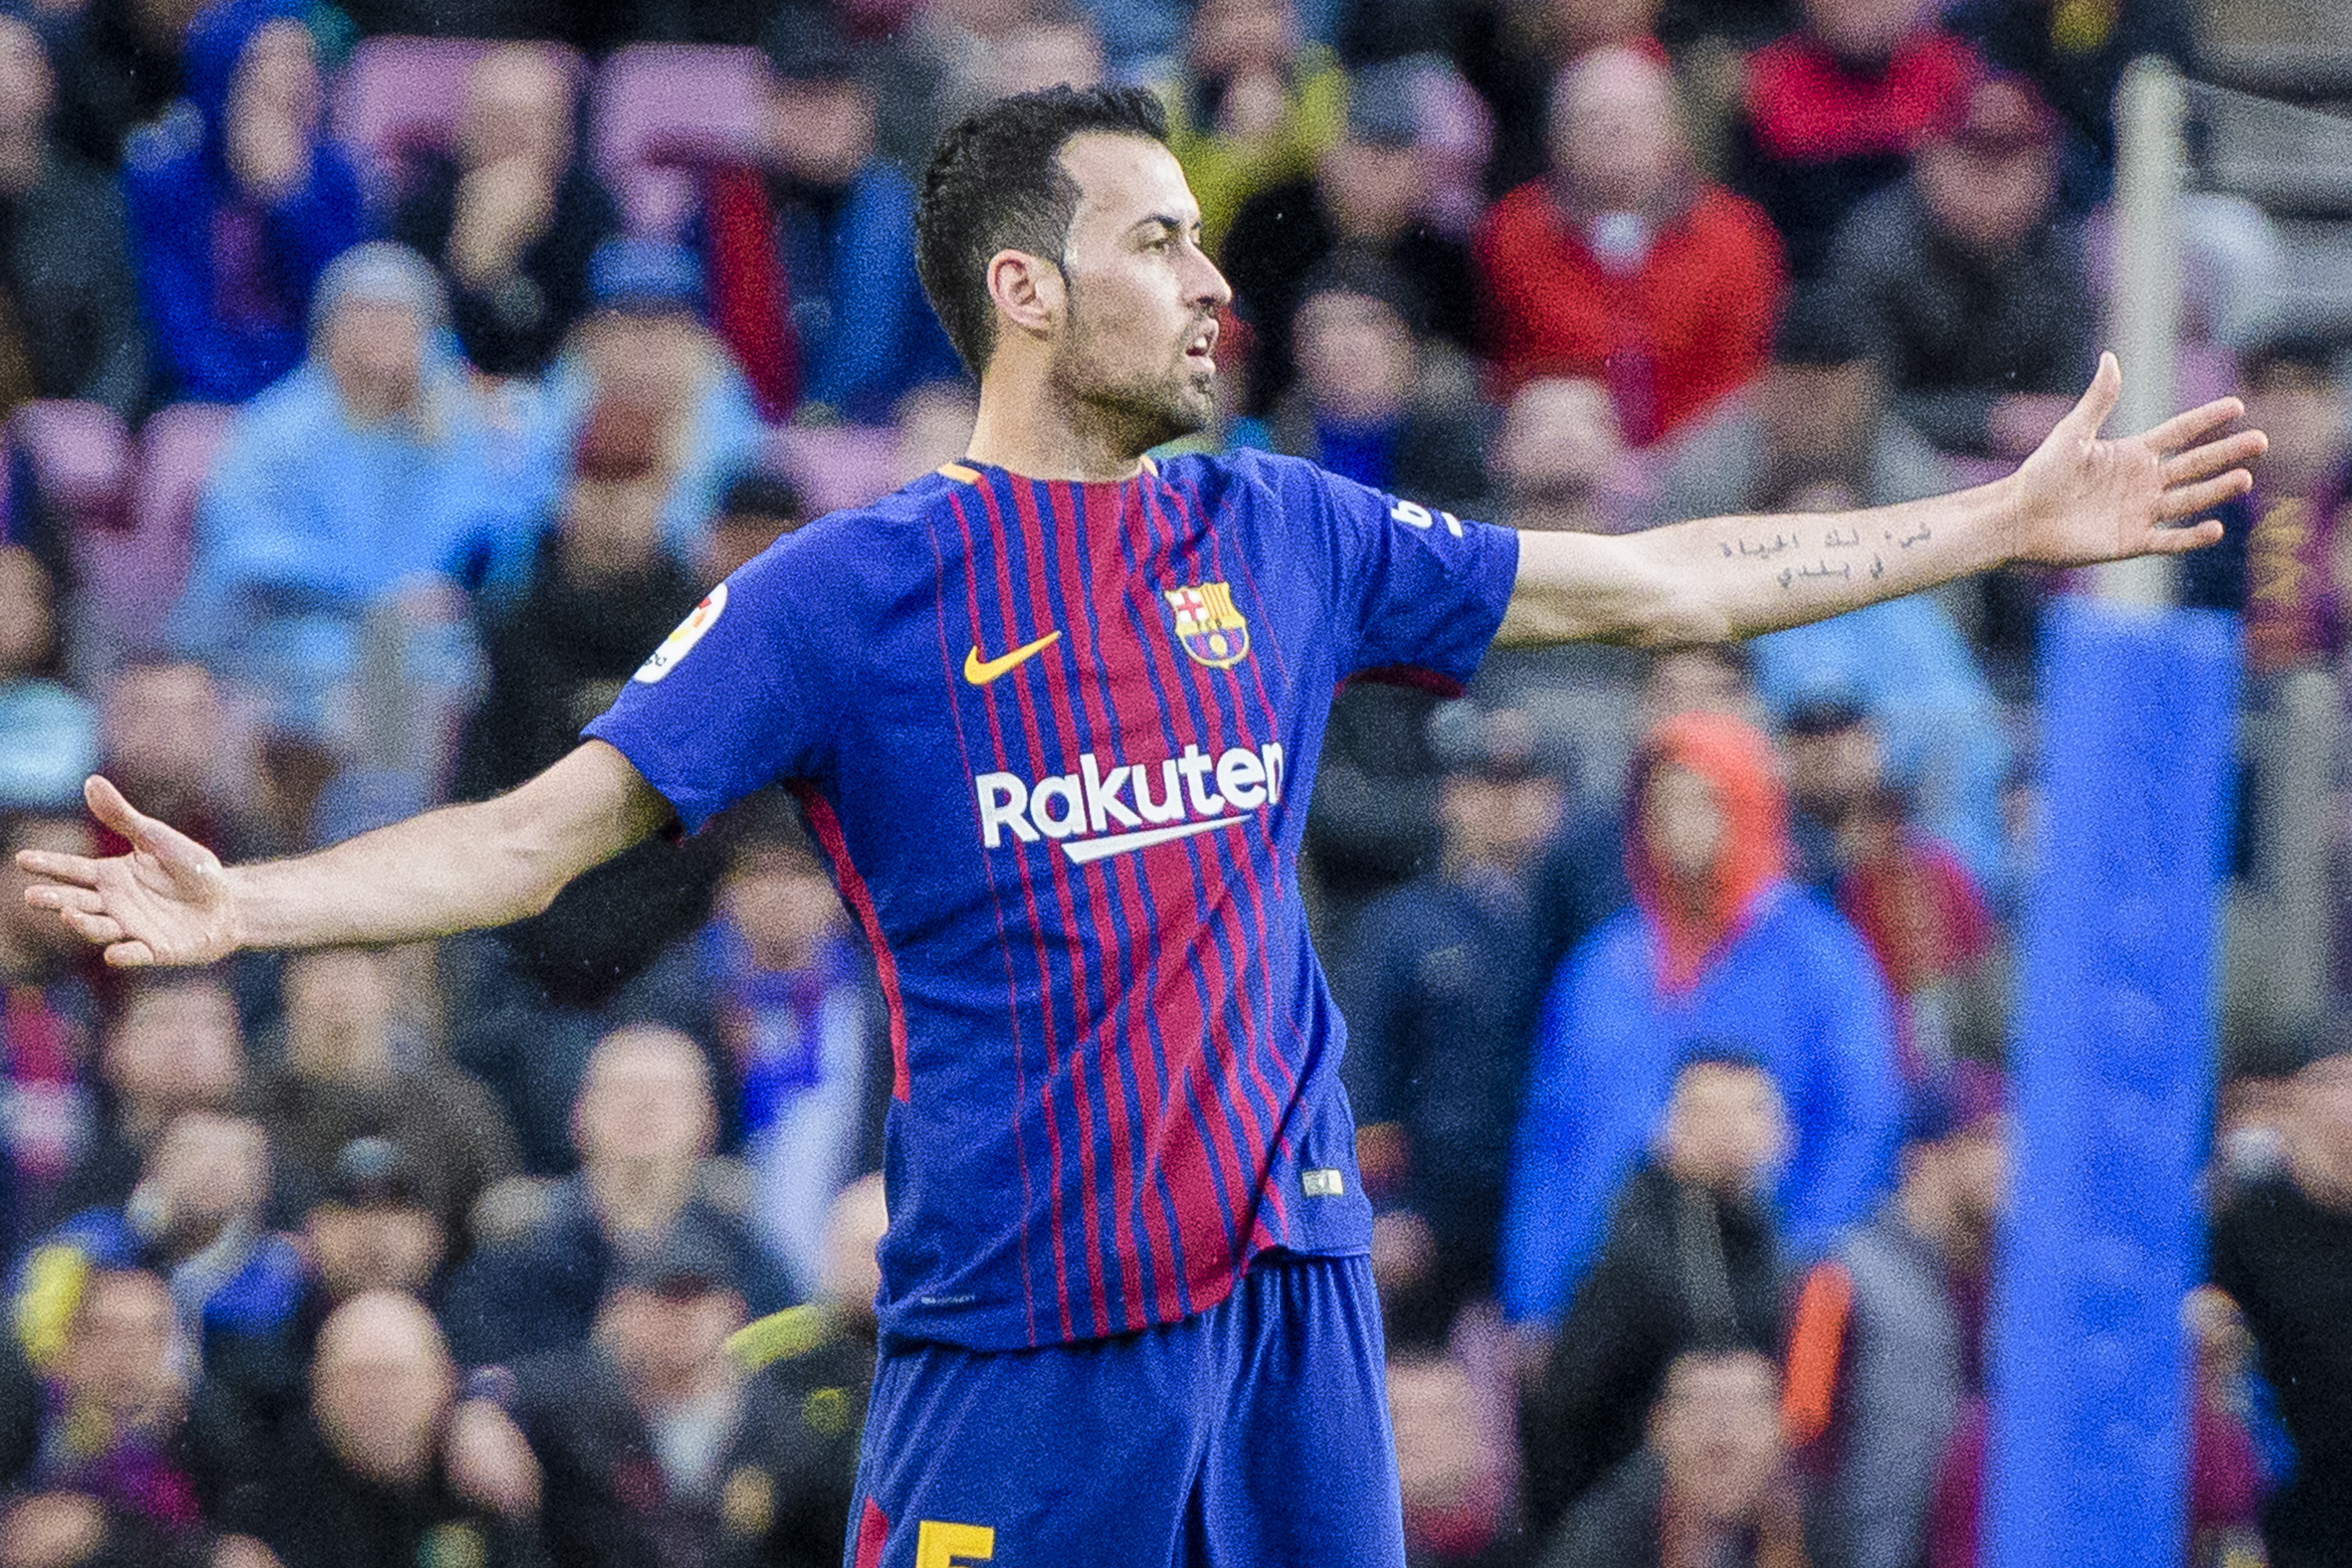 Barcelona midfielder Sergio Busquets gestures during a La Liga match against Atletico Madrid in 2018.